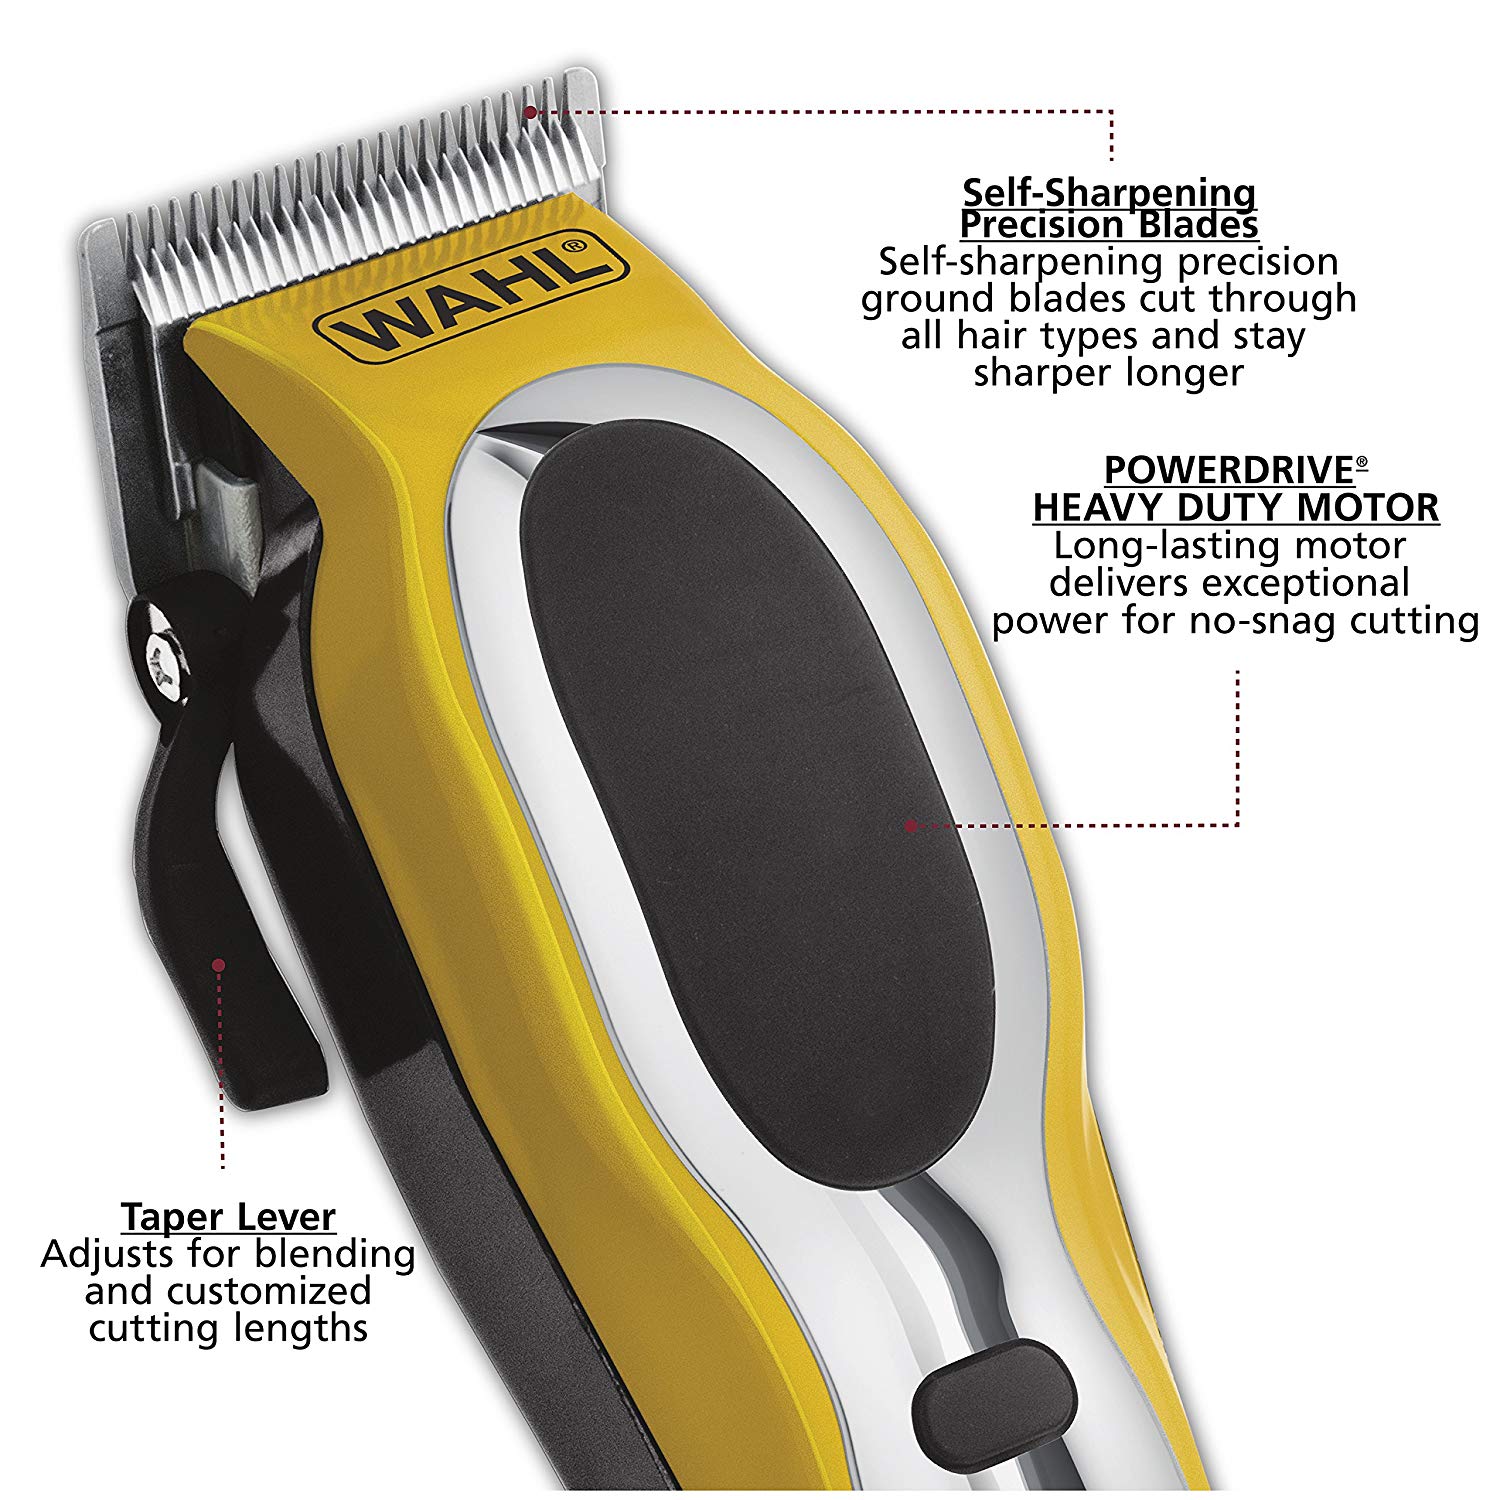 wahl total cut and trim